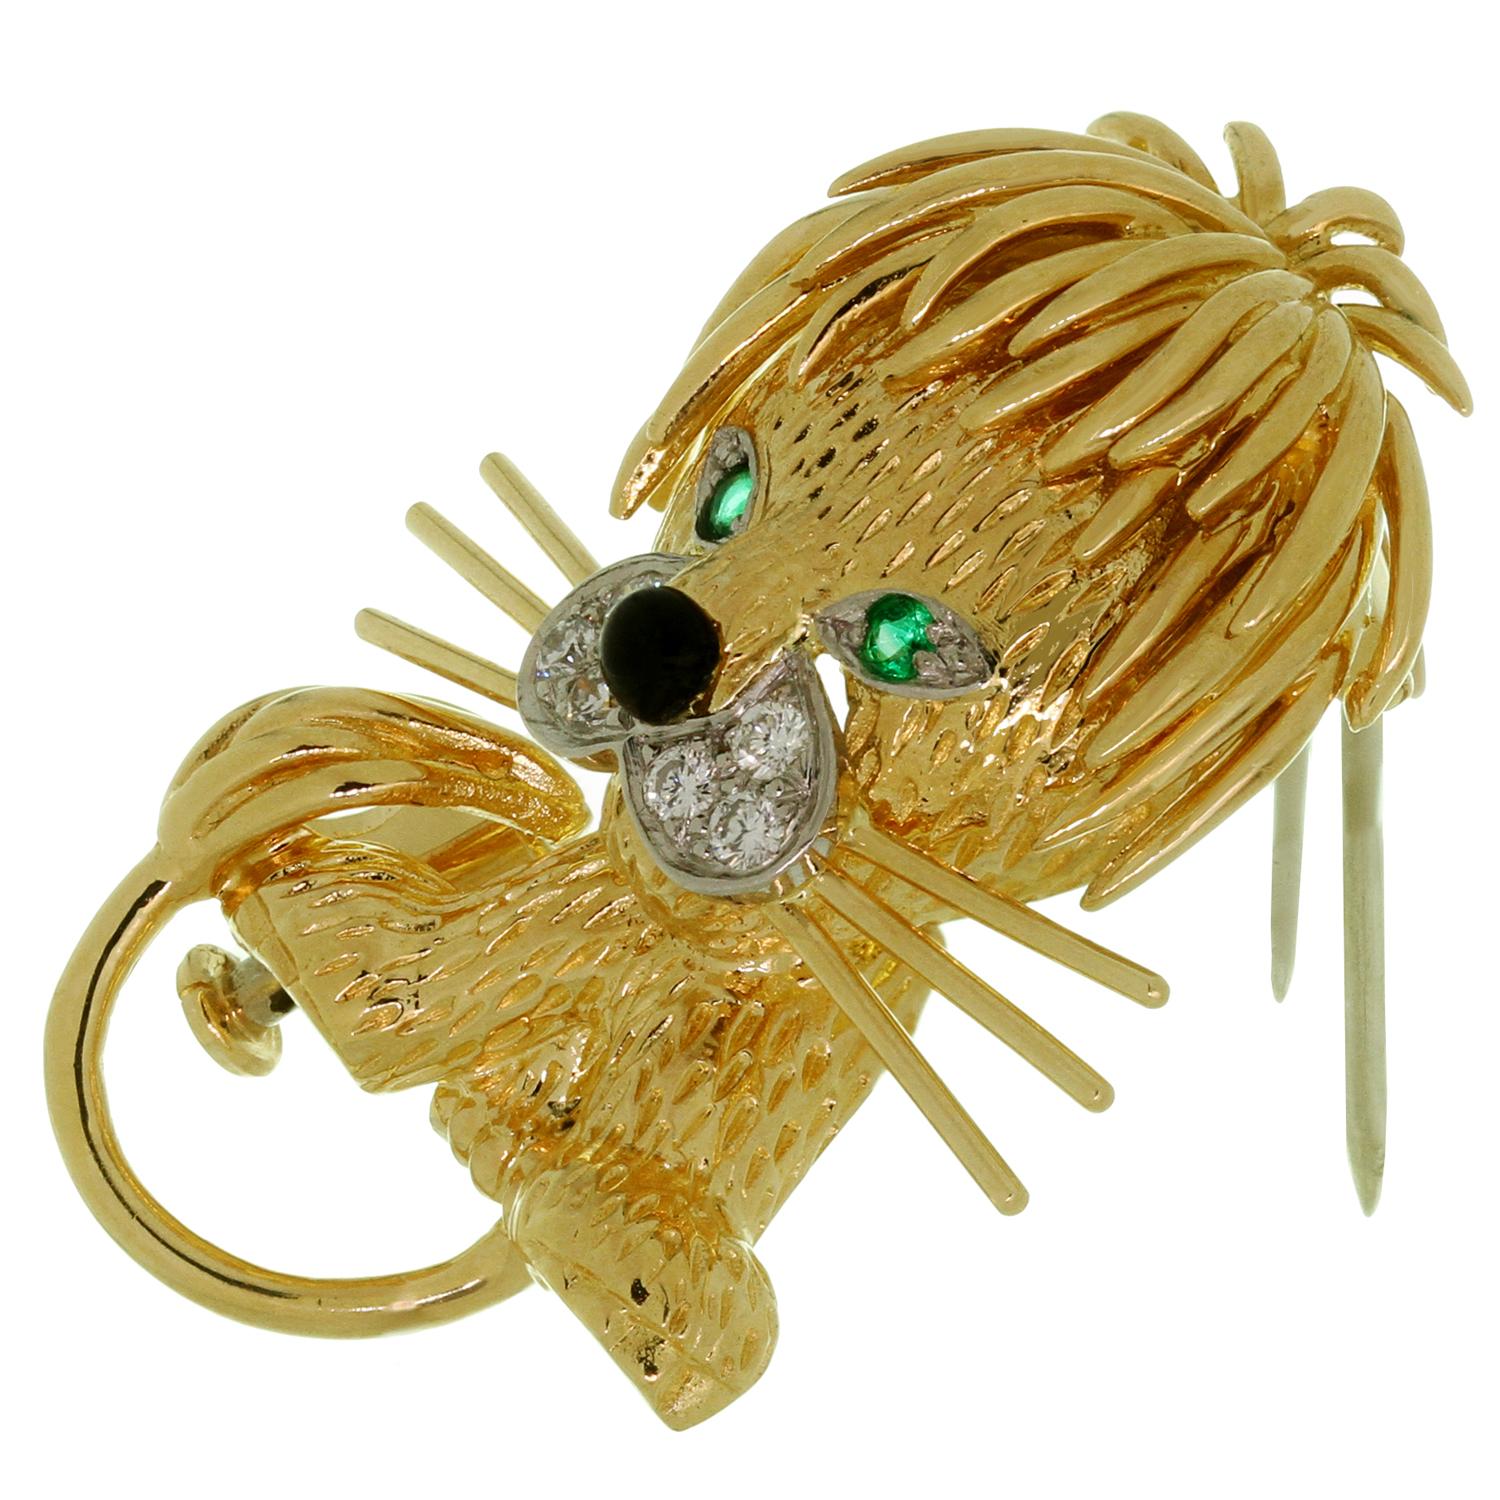 This iconic Van Cleef & Arpels brooch features a stunning lion design crafted in 18k yellow gold and accented with faceted emerald eyes, black enamel nose and brilliant-cut round E-F VVS2-VS1 diamonds of an estimated 0.15 carats. Made in France